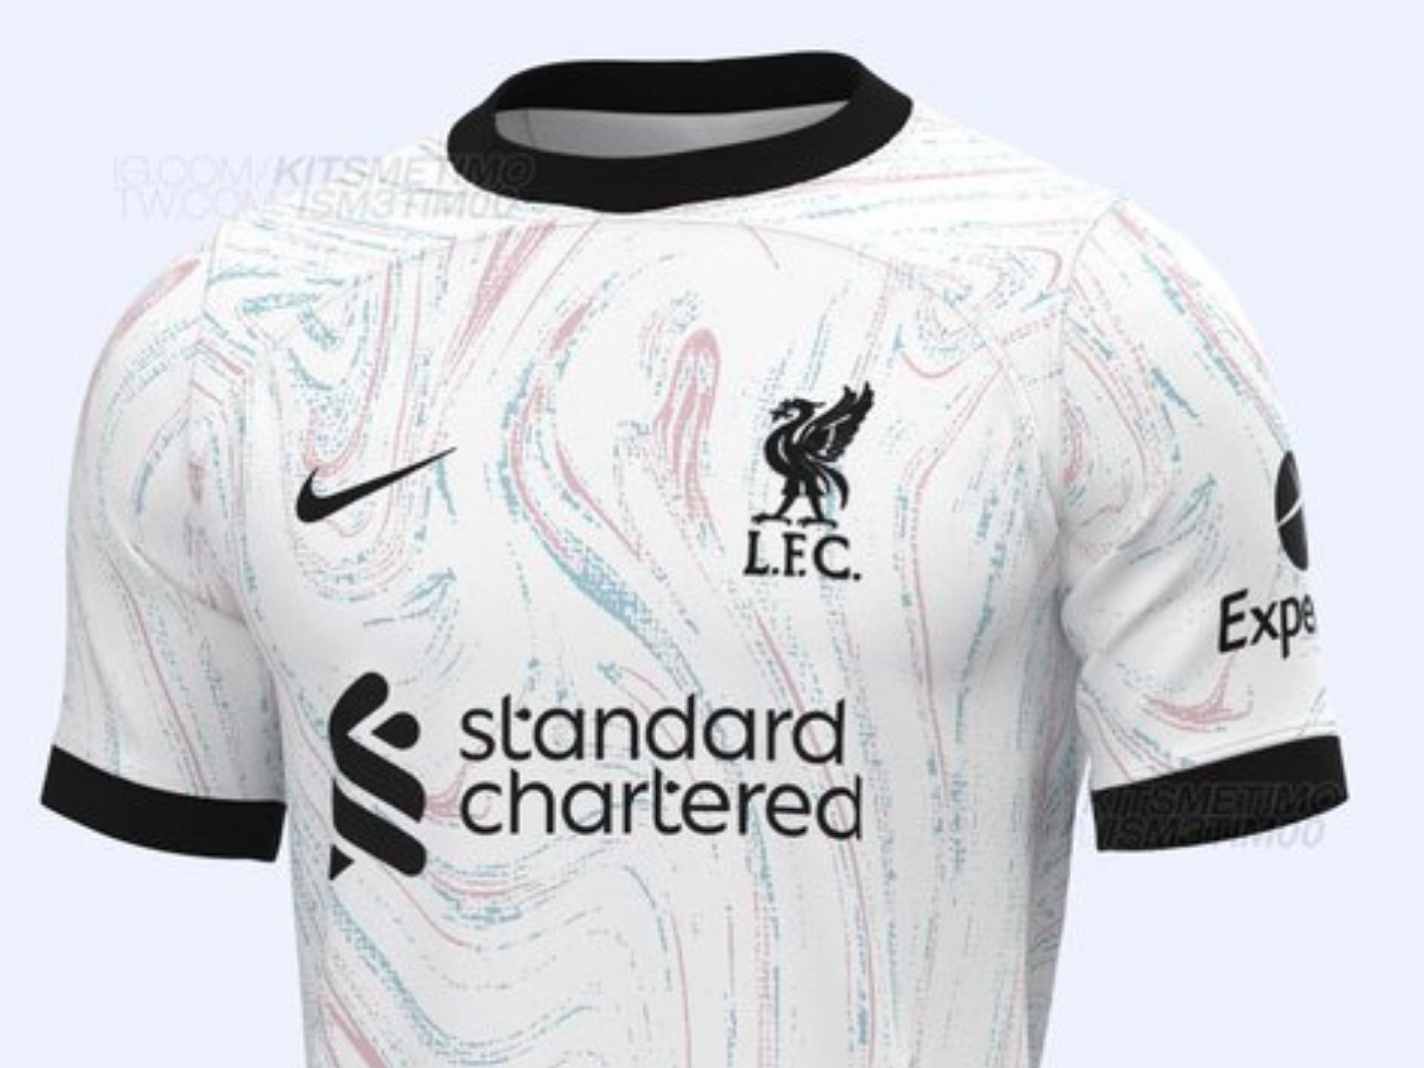 Leaked design shows Liverpool 22/23 away kit to be a classic white strip with red and blue marbled print